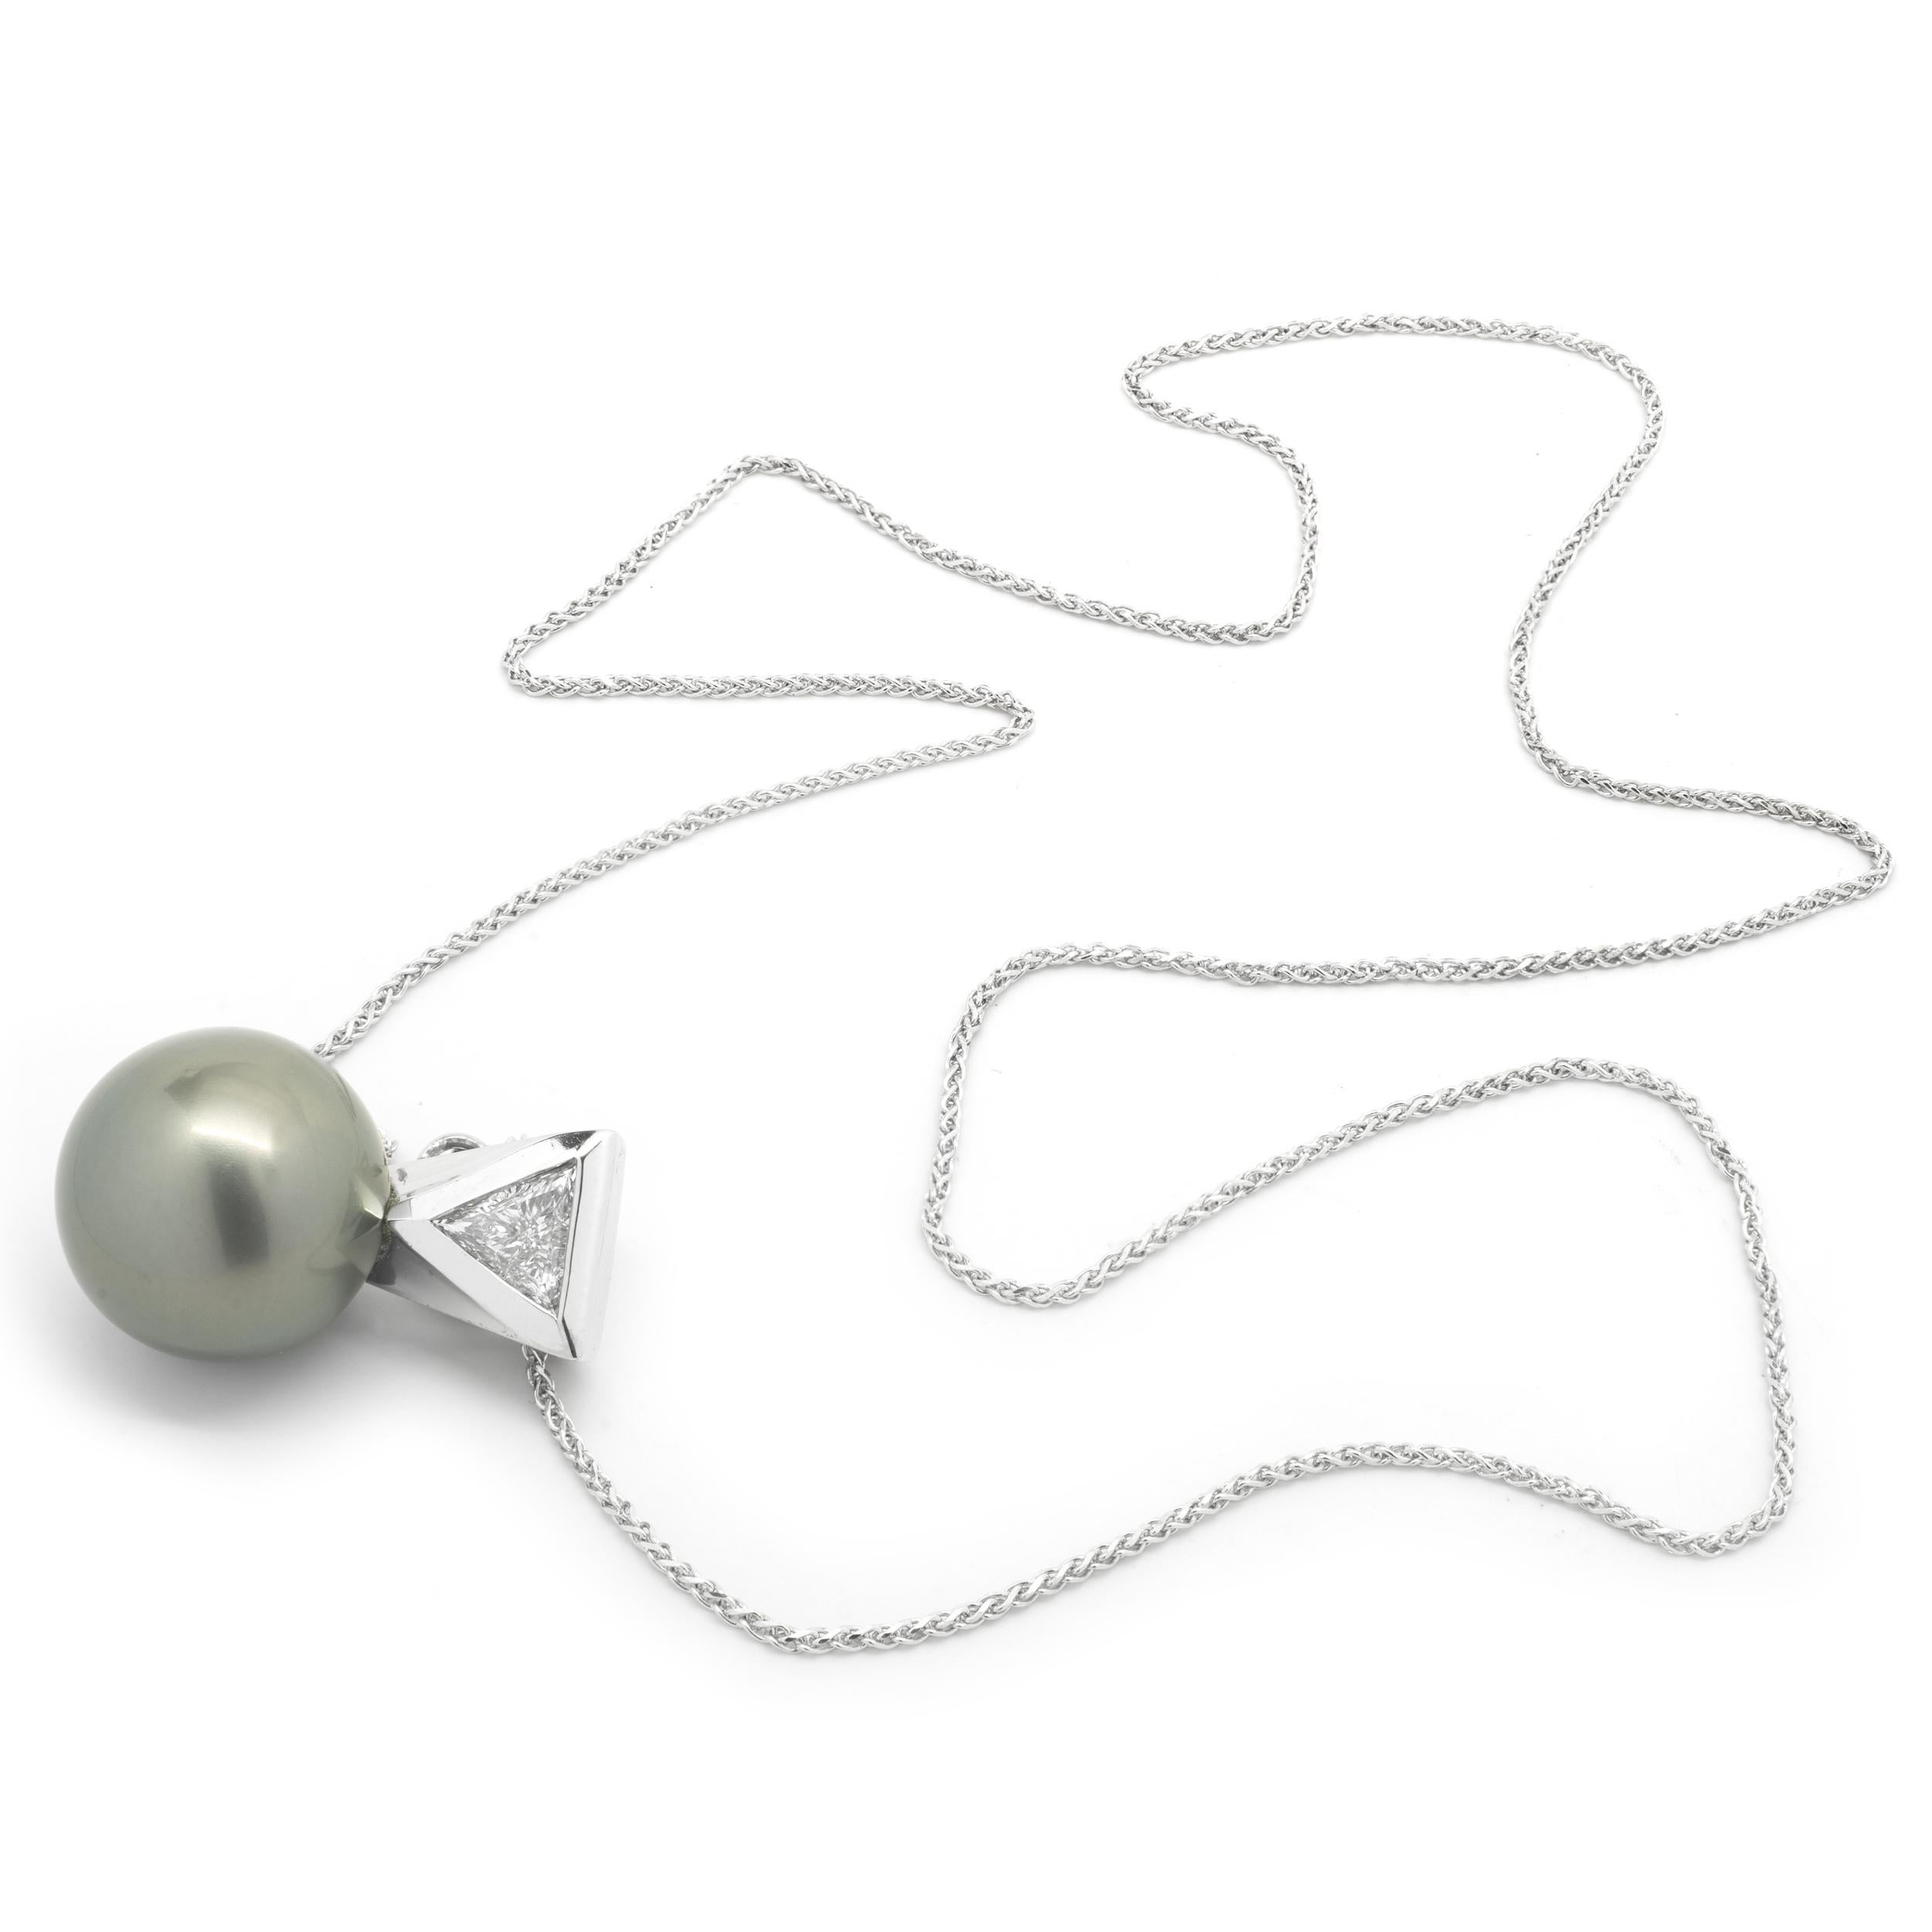 Designer: Custom
Material: 14K white gold
Pearl: Tahitian pearl = 13.4mm
Diamond: 1 trillion cut = .45ct
Color: I
Clarity: SI2
Dimensions: necklace measures 18-inches in length
Weight: 8.75 grams
